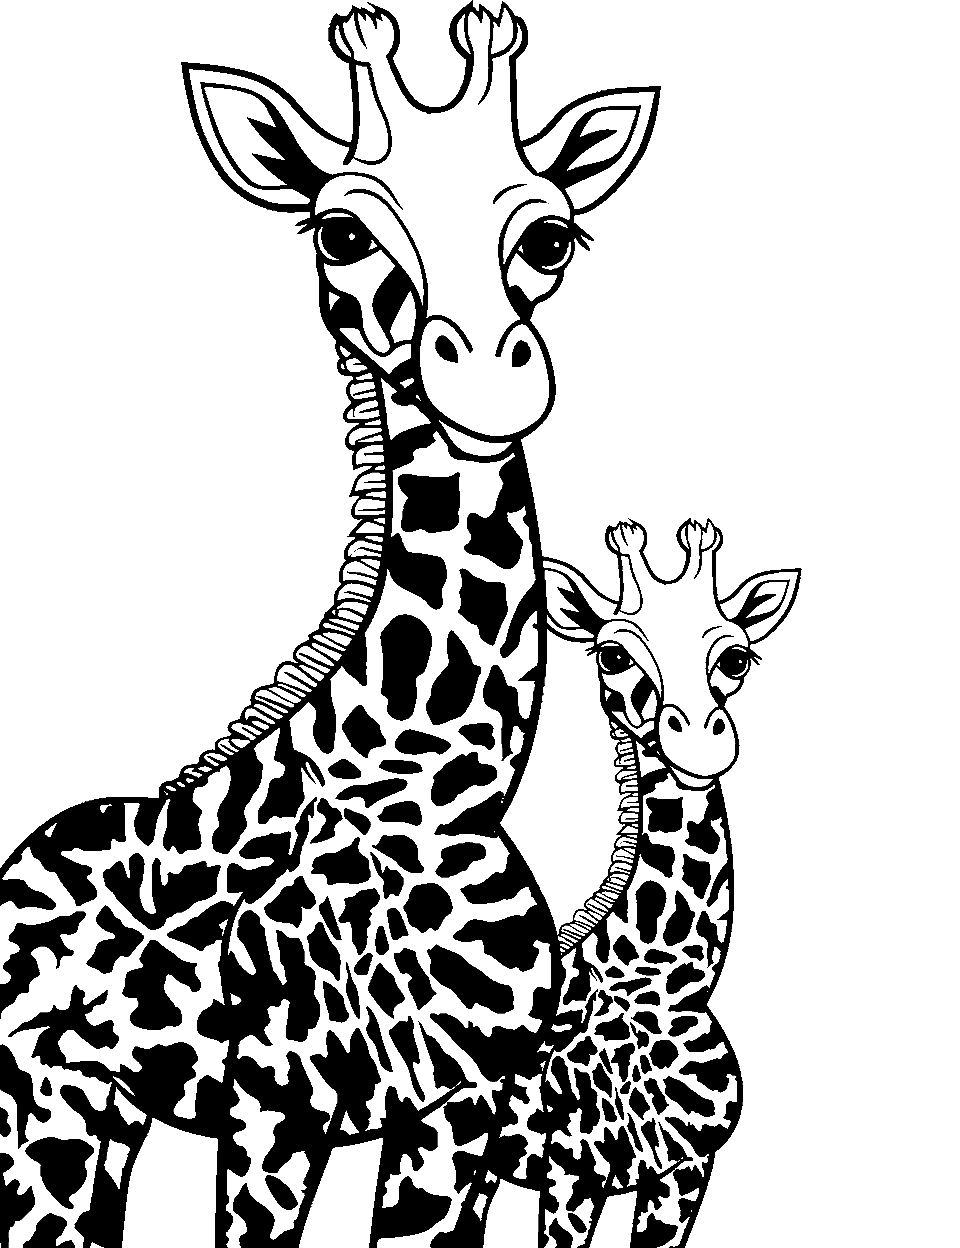 Family Time Coloring Page - A mother giraffe with her calf, standing close together.